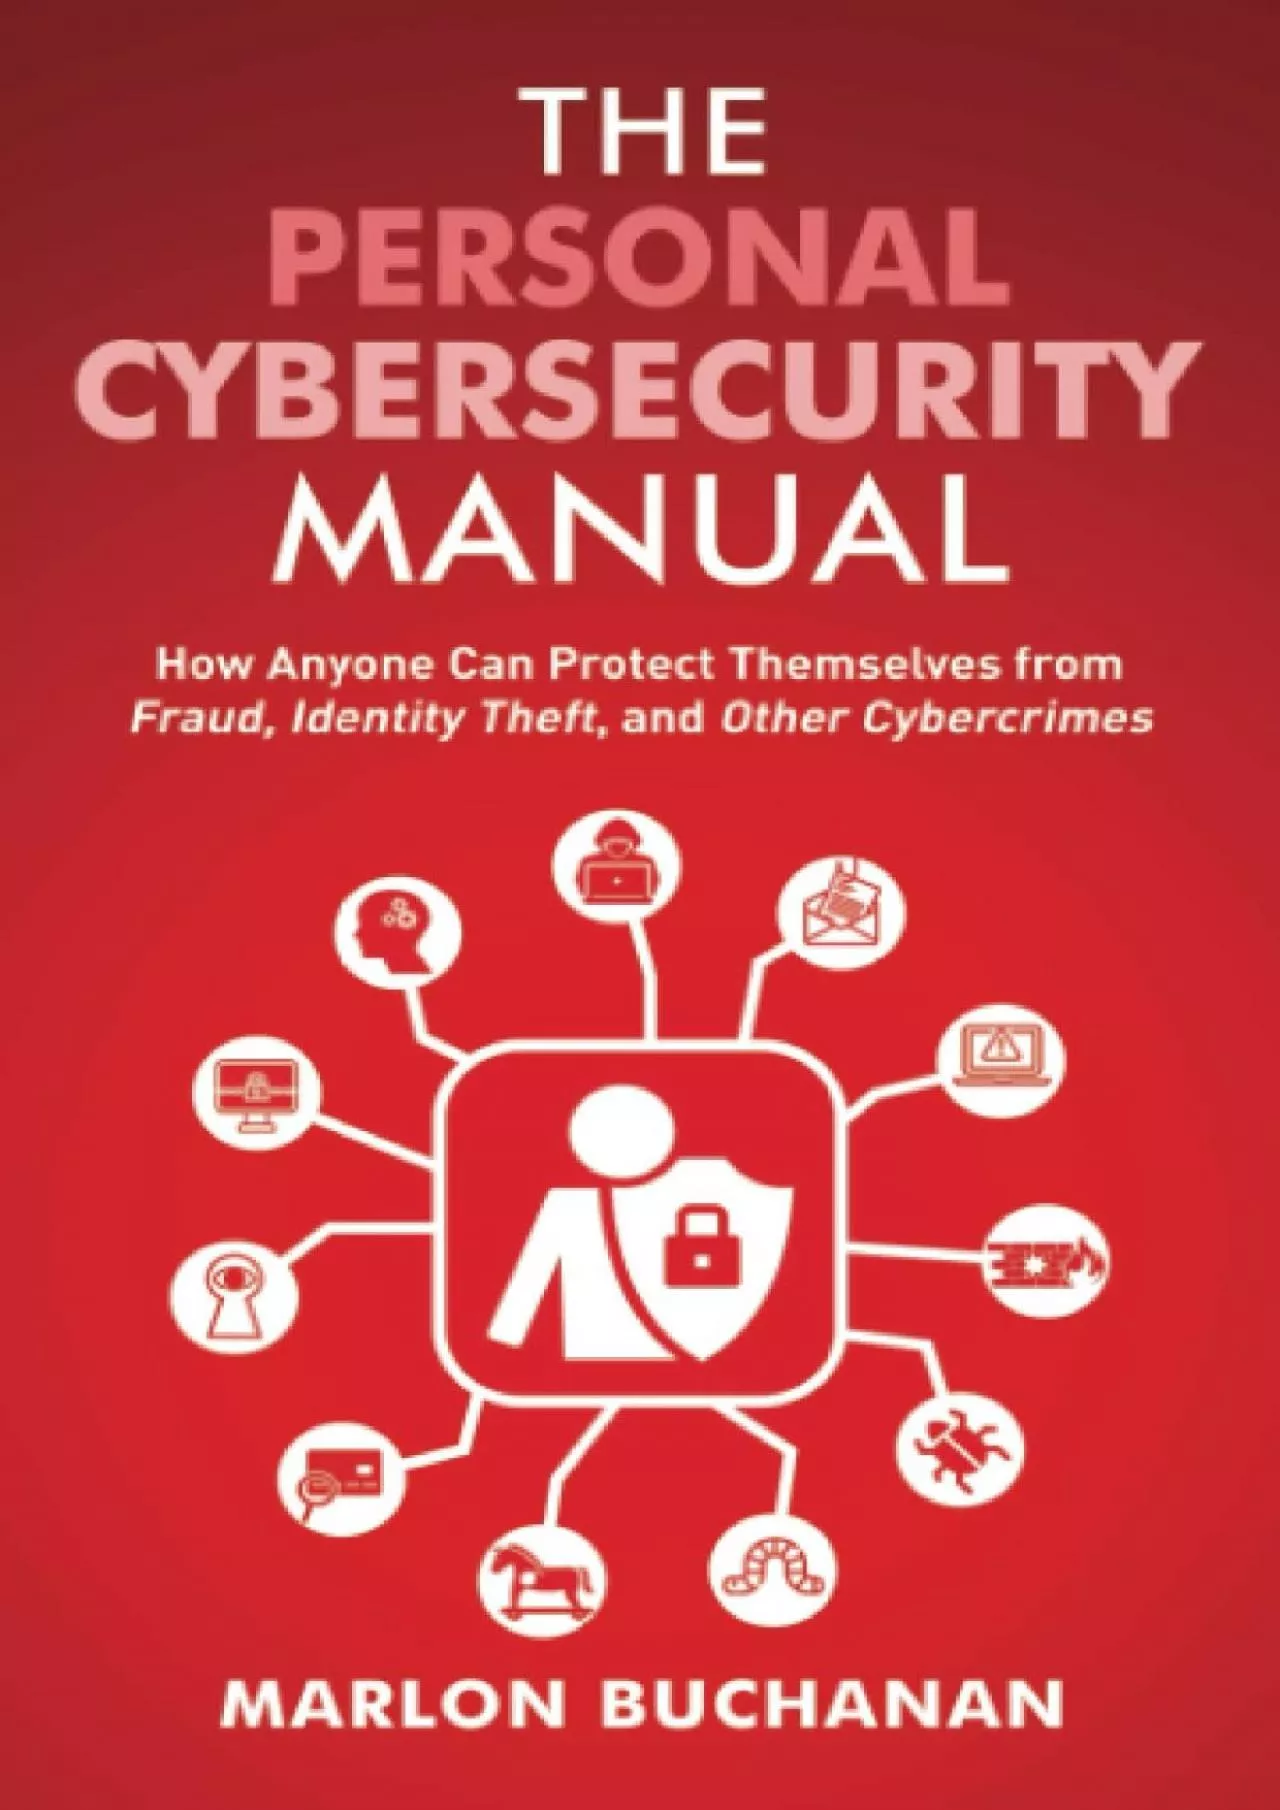 (DOWNLOAD)-The Personal Cybersecurity Manual: How Anyone Can Protect Themselves from Fraud,